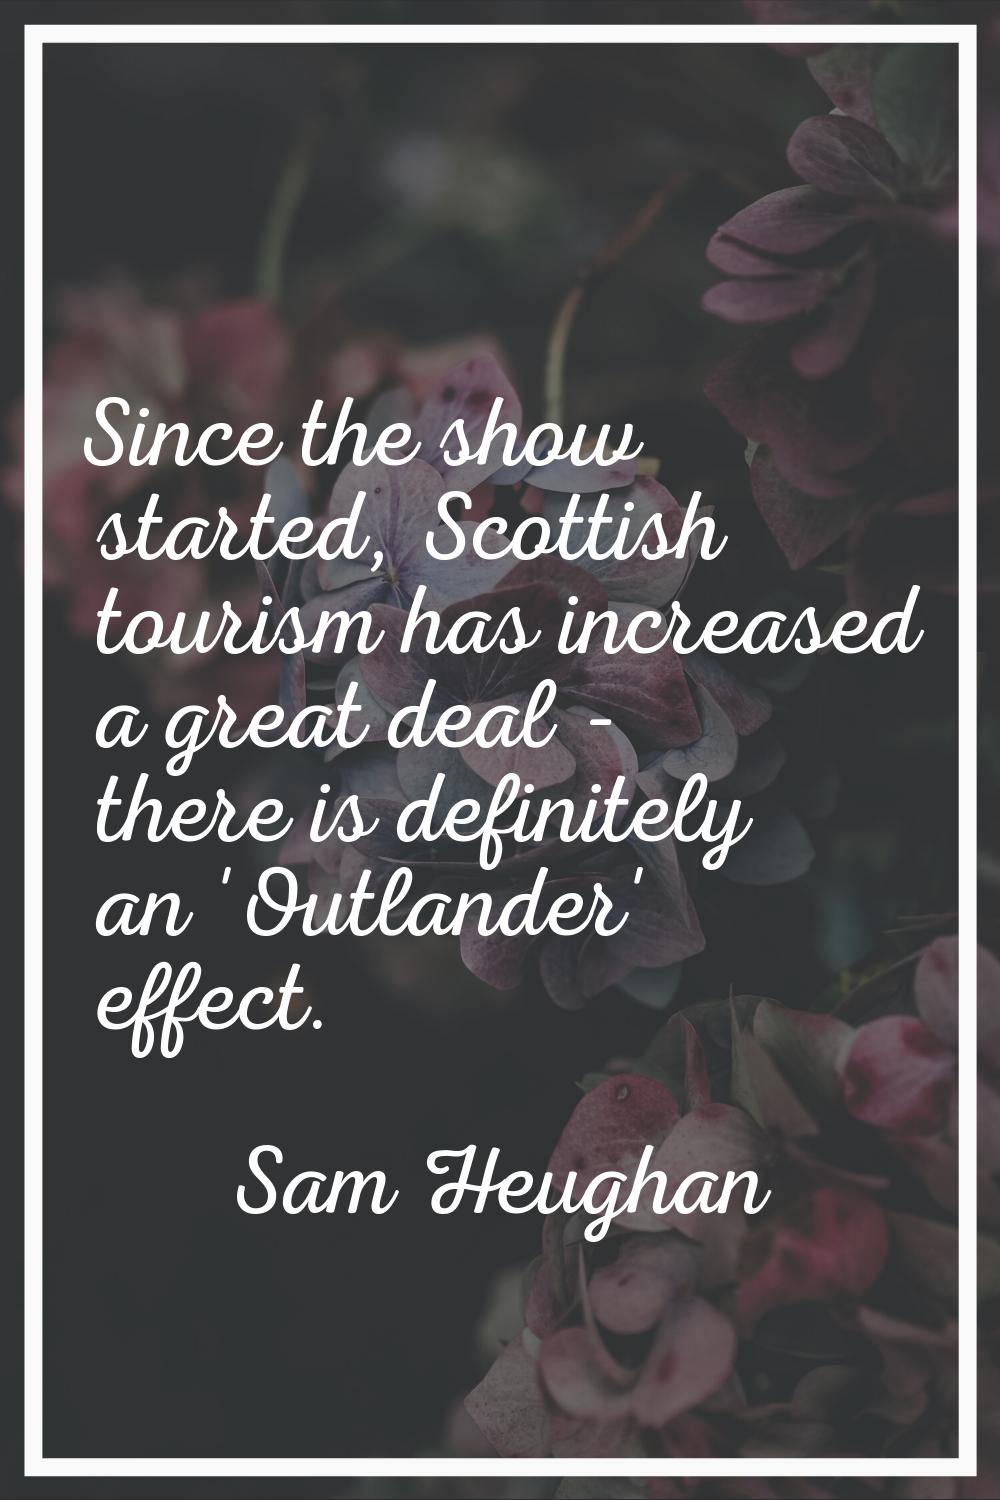 Since the show started, Scottish tourism has increased a great deal - there is definitely an 'Outla